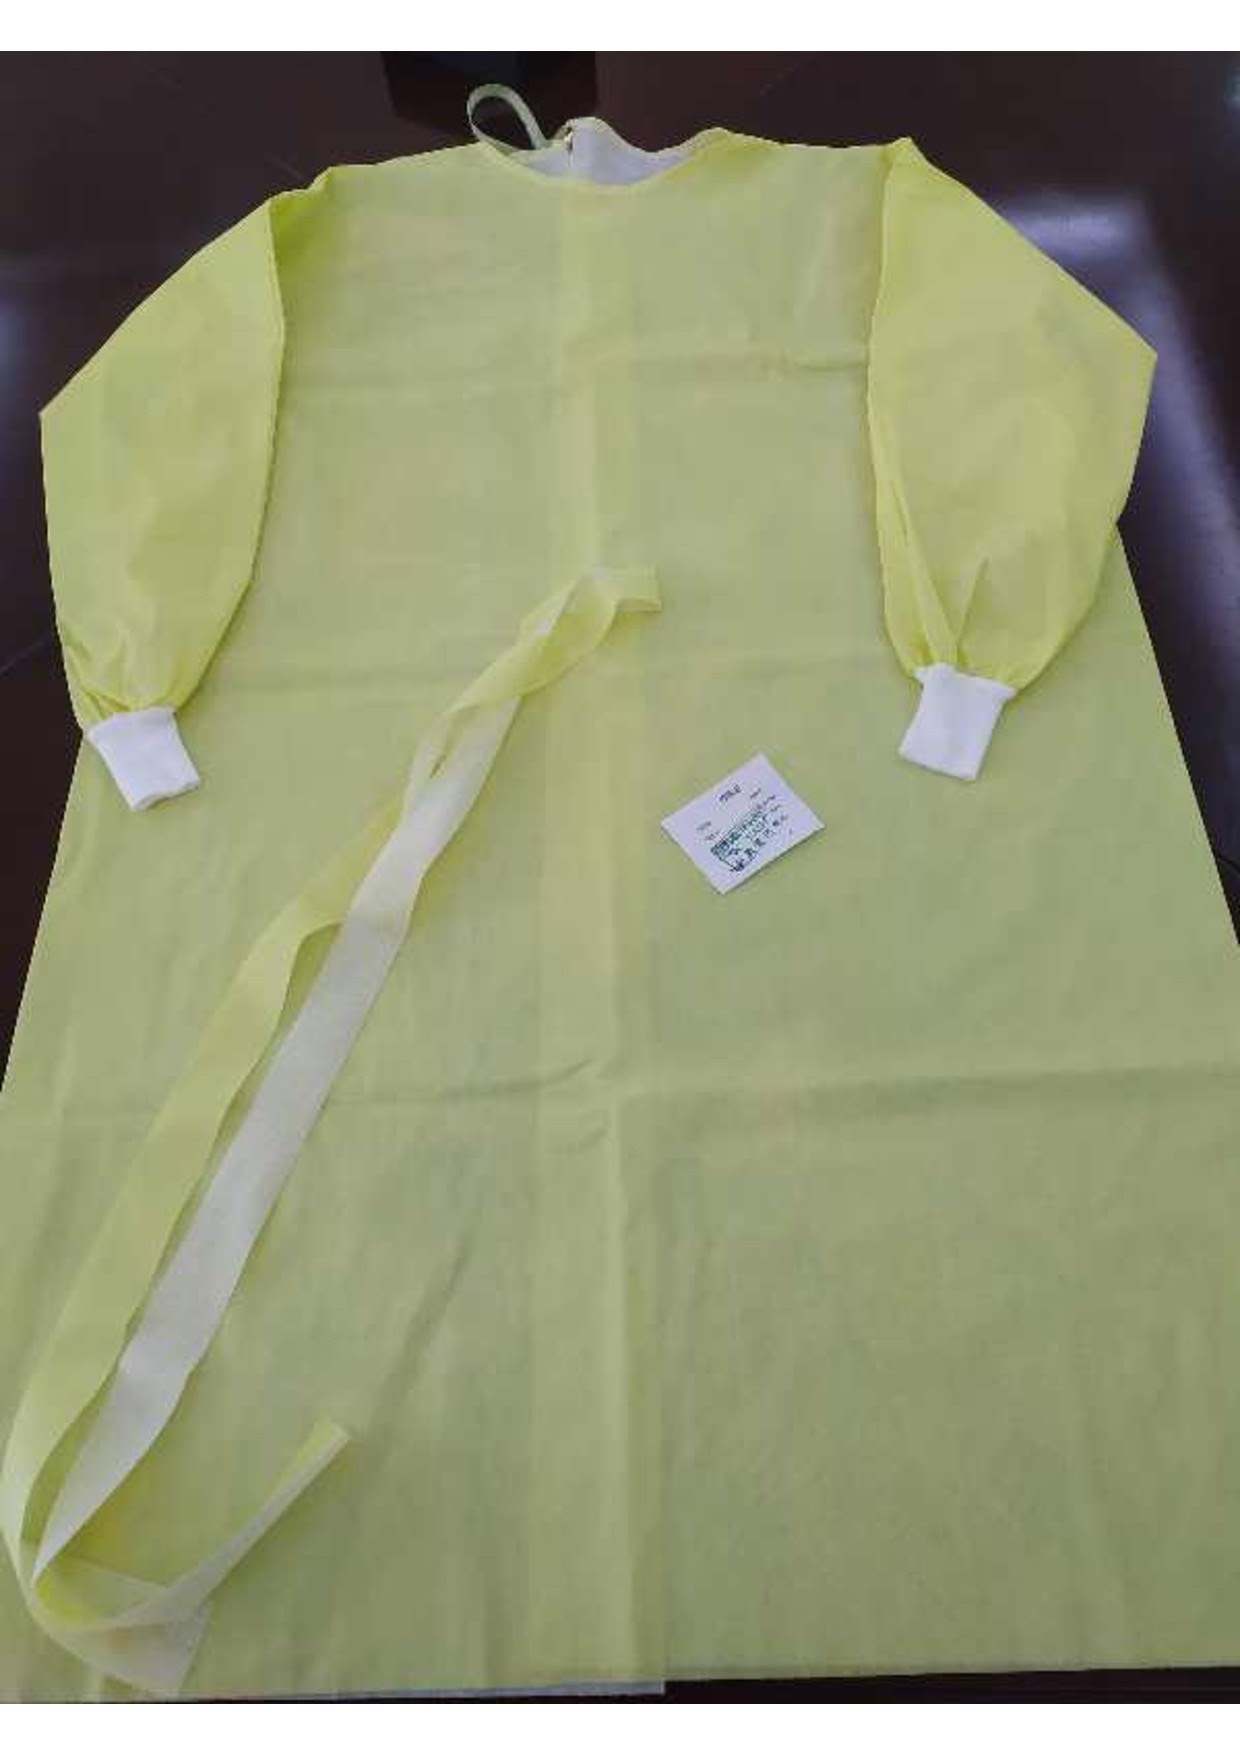 Offers  For Sale: 300,000 Non Surgical Isolation Gowns